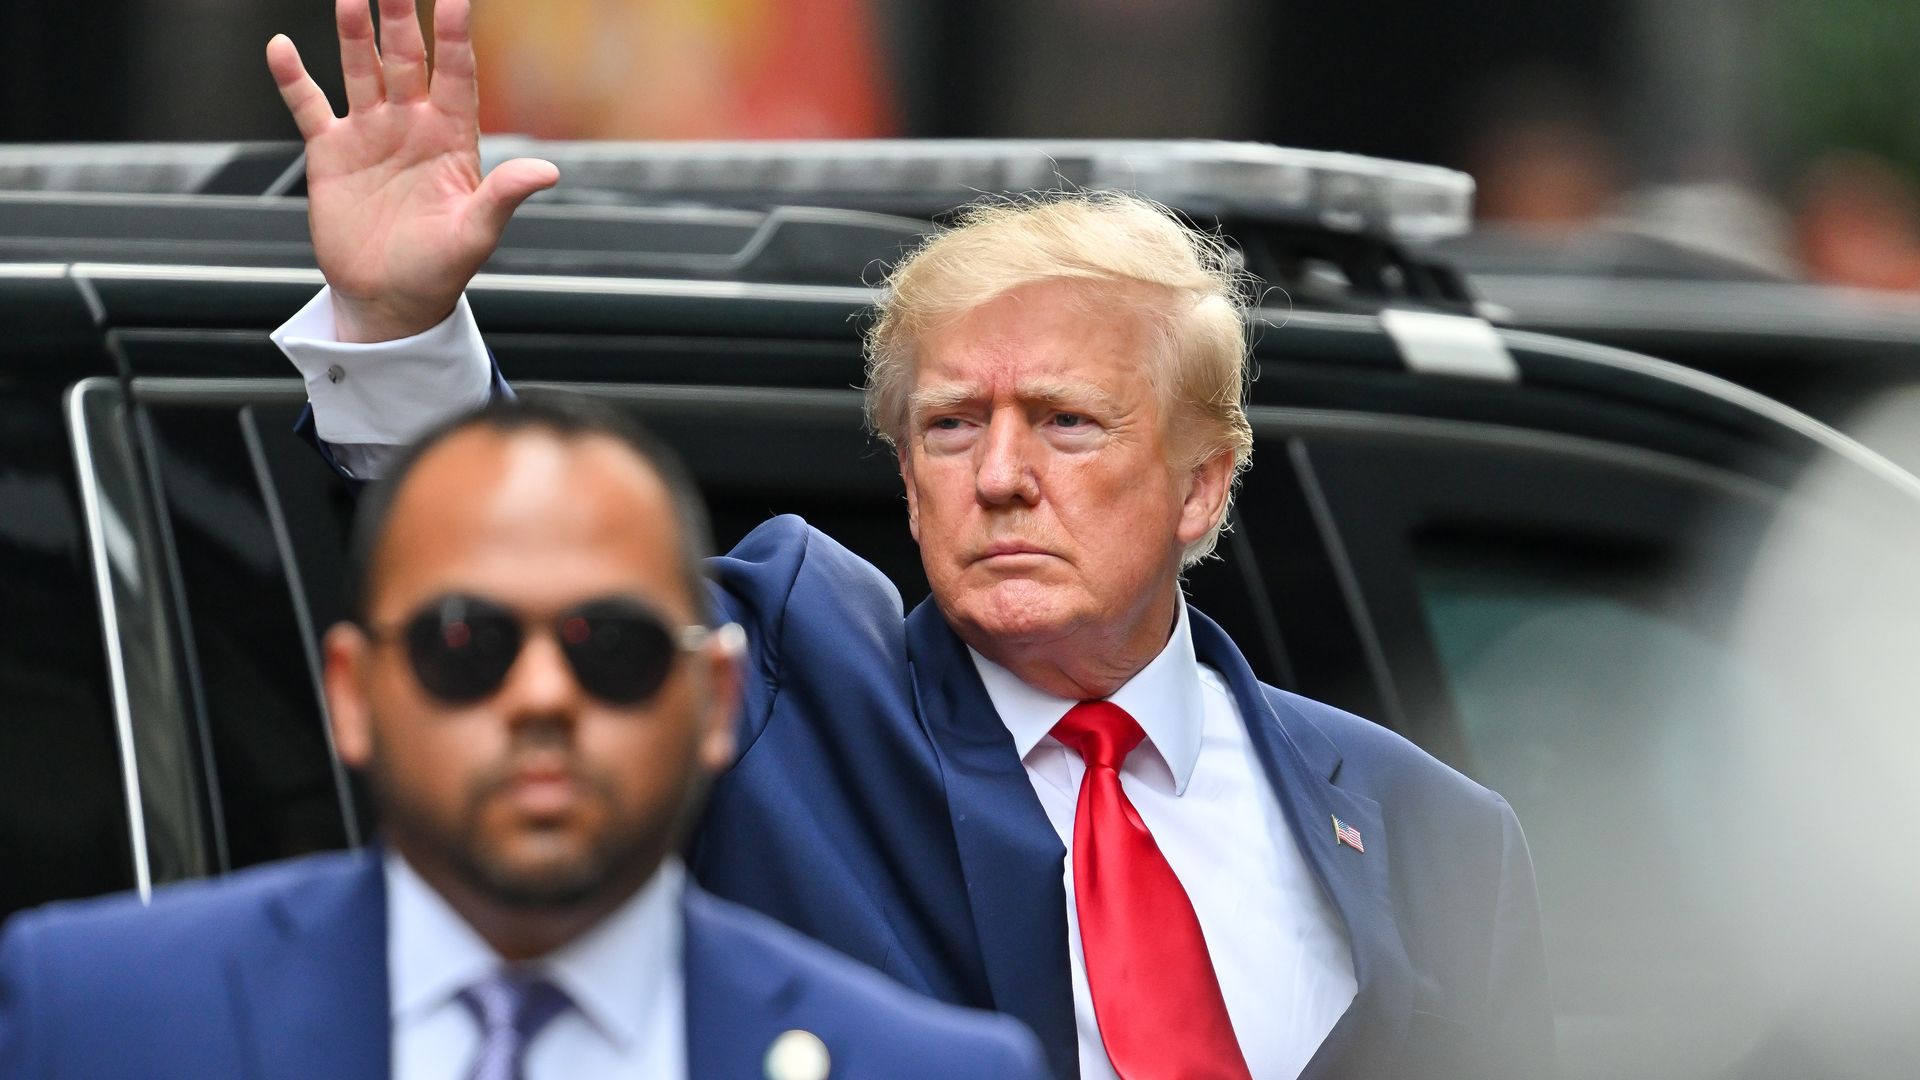 Former U.S. President Donald Trump leaves Trump Tower to meet with New York Attorney General Letitia James for a civil investigation on August 10, 2022 in New York City